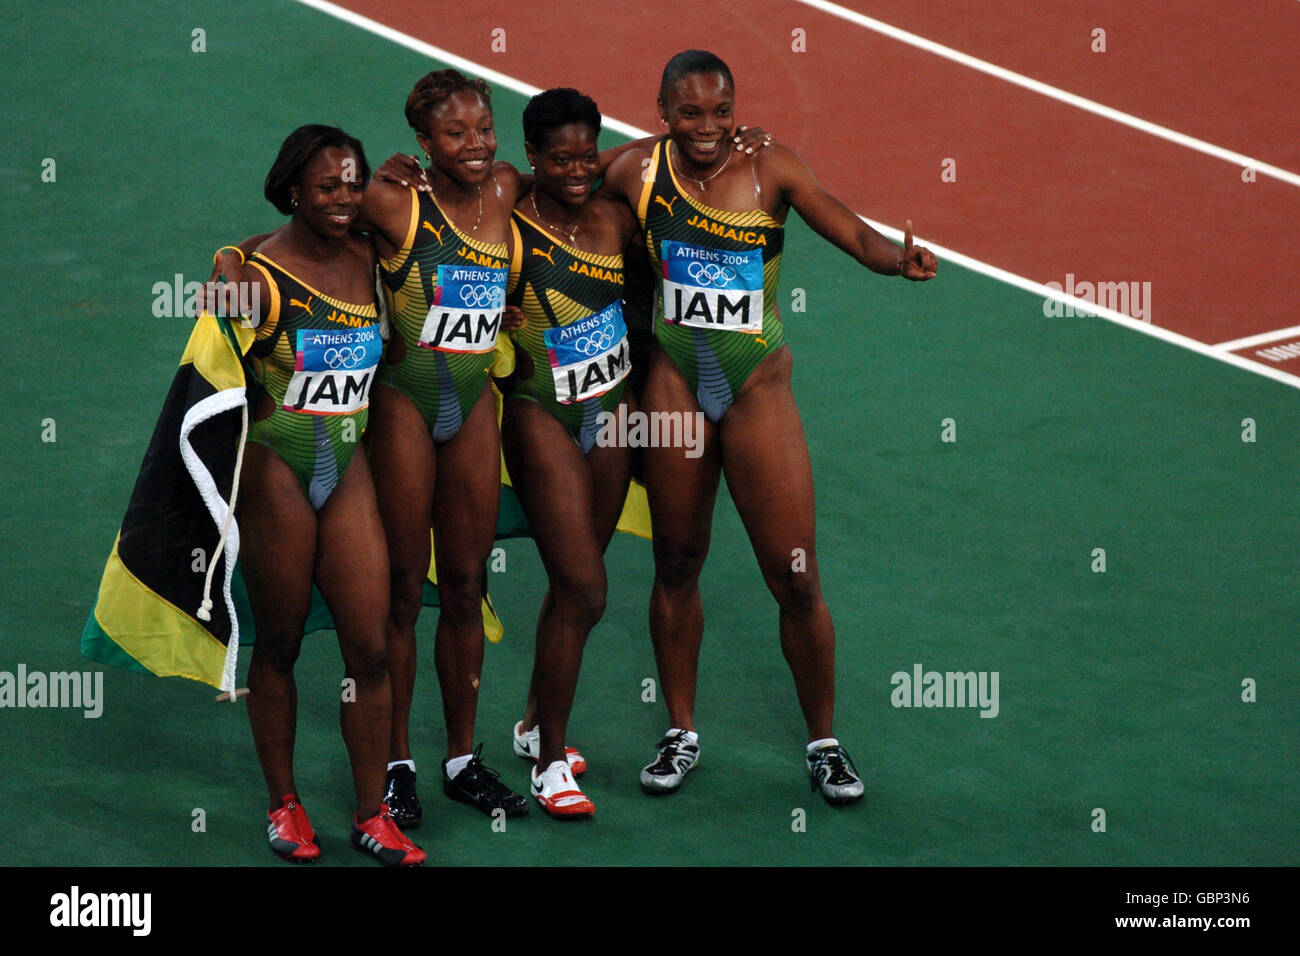 (L-R) The Jamacia team of Veronica Campbell, Sherone Simpson, Tayna Lawrence and Aleen Bailey celebrate winning the gold medal Stock Photo